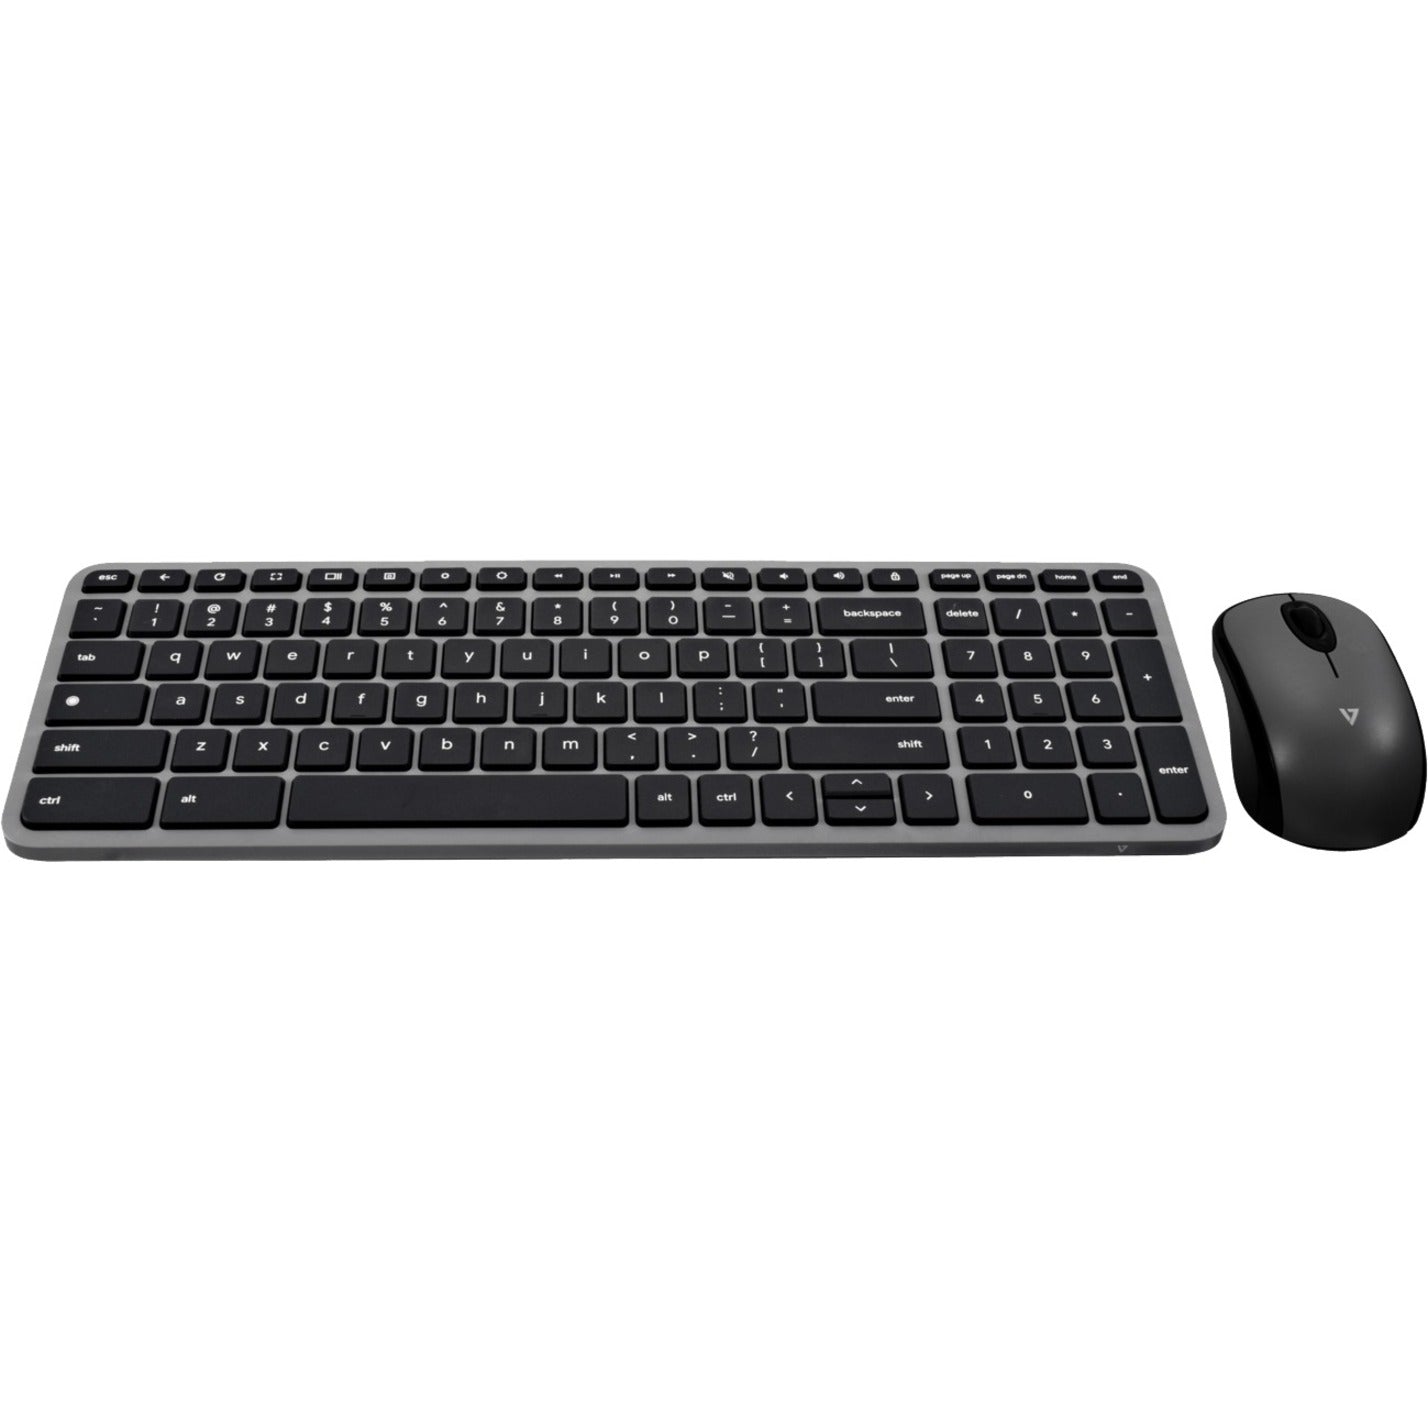 V7 CKW150BTUS Bluetooth Keyboard and Mouse Combo Chromebook Edition, 2 Year Warranty, Wear Resistant, Numeric Keypad